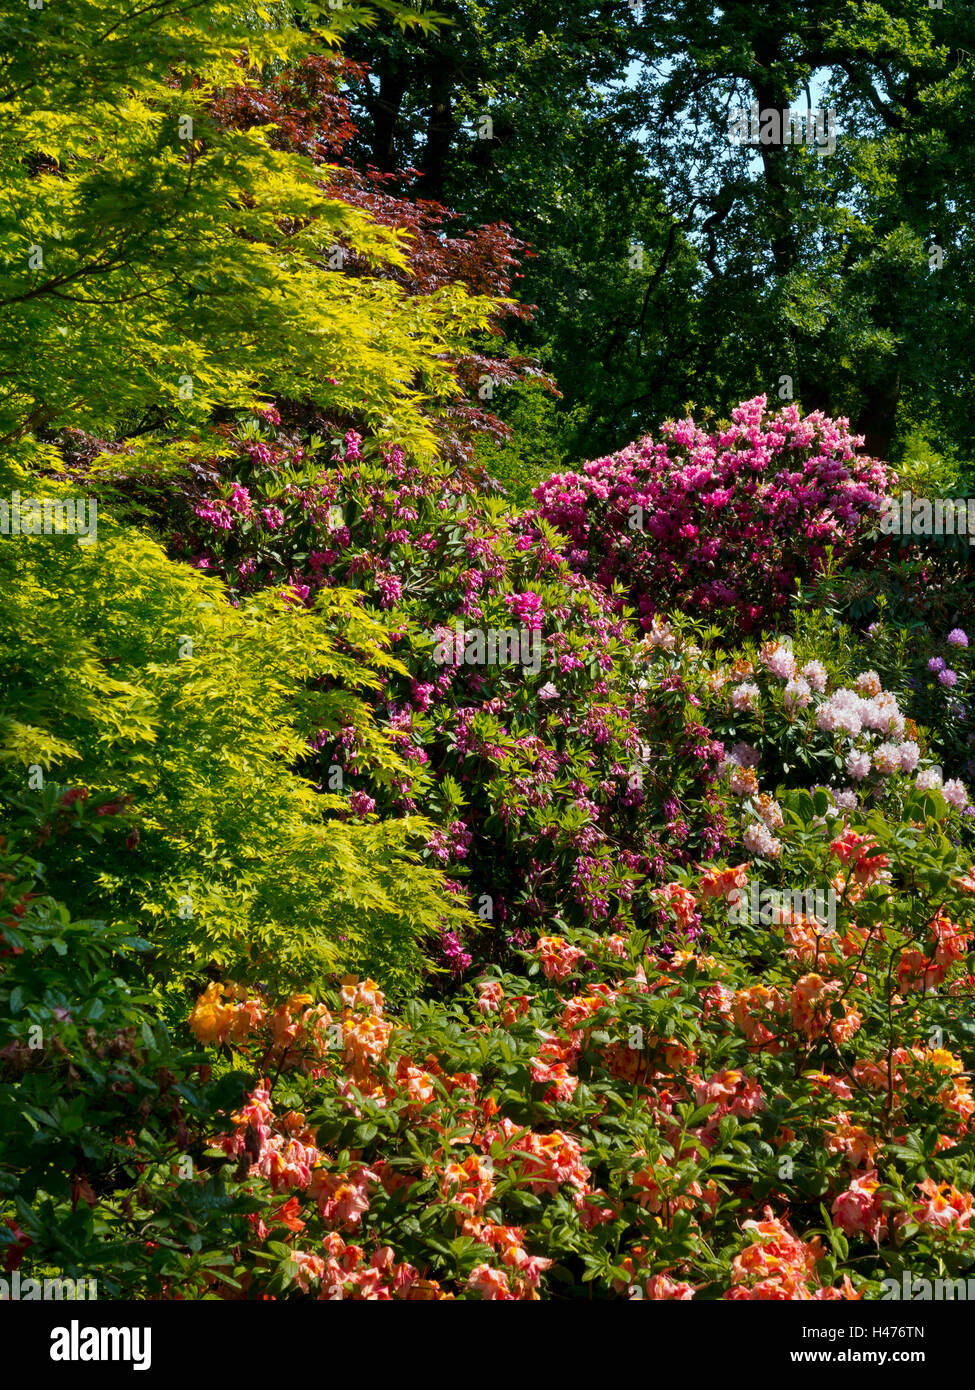 Rhododendrons in the Quarry Garden in early June at the Dorothy Clive Garden near Market Drayton in Shropshire England UK Stock Photo